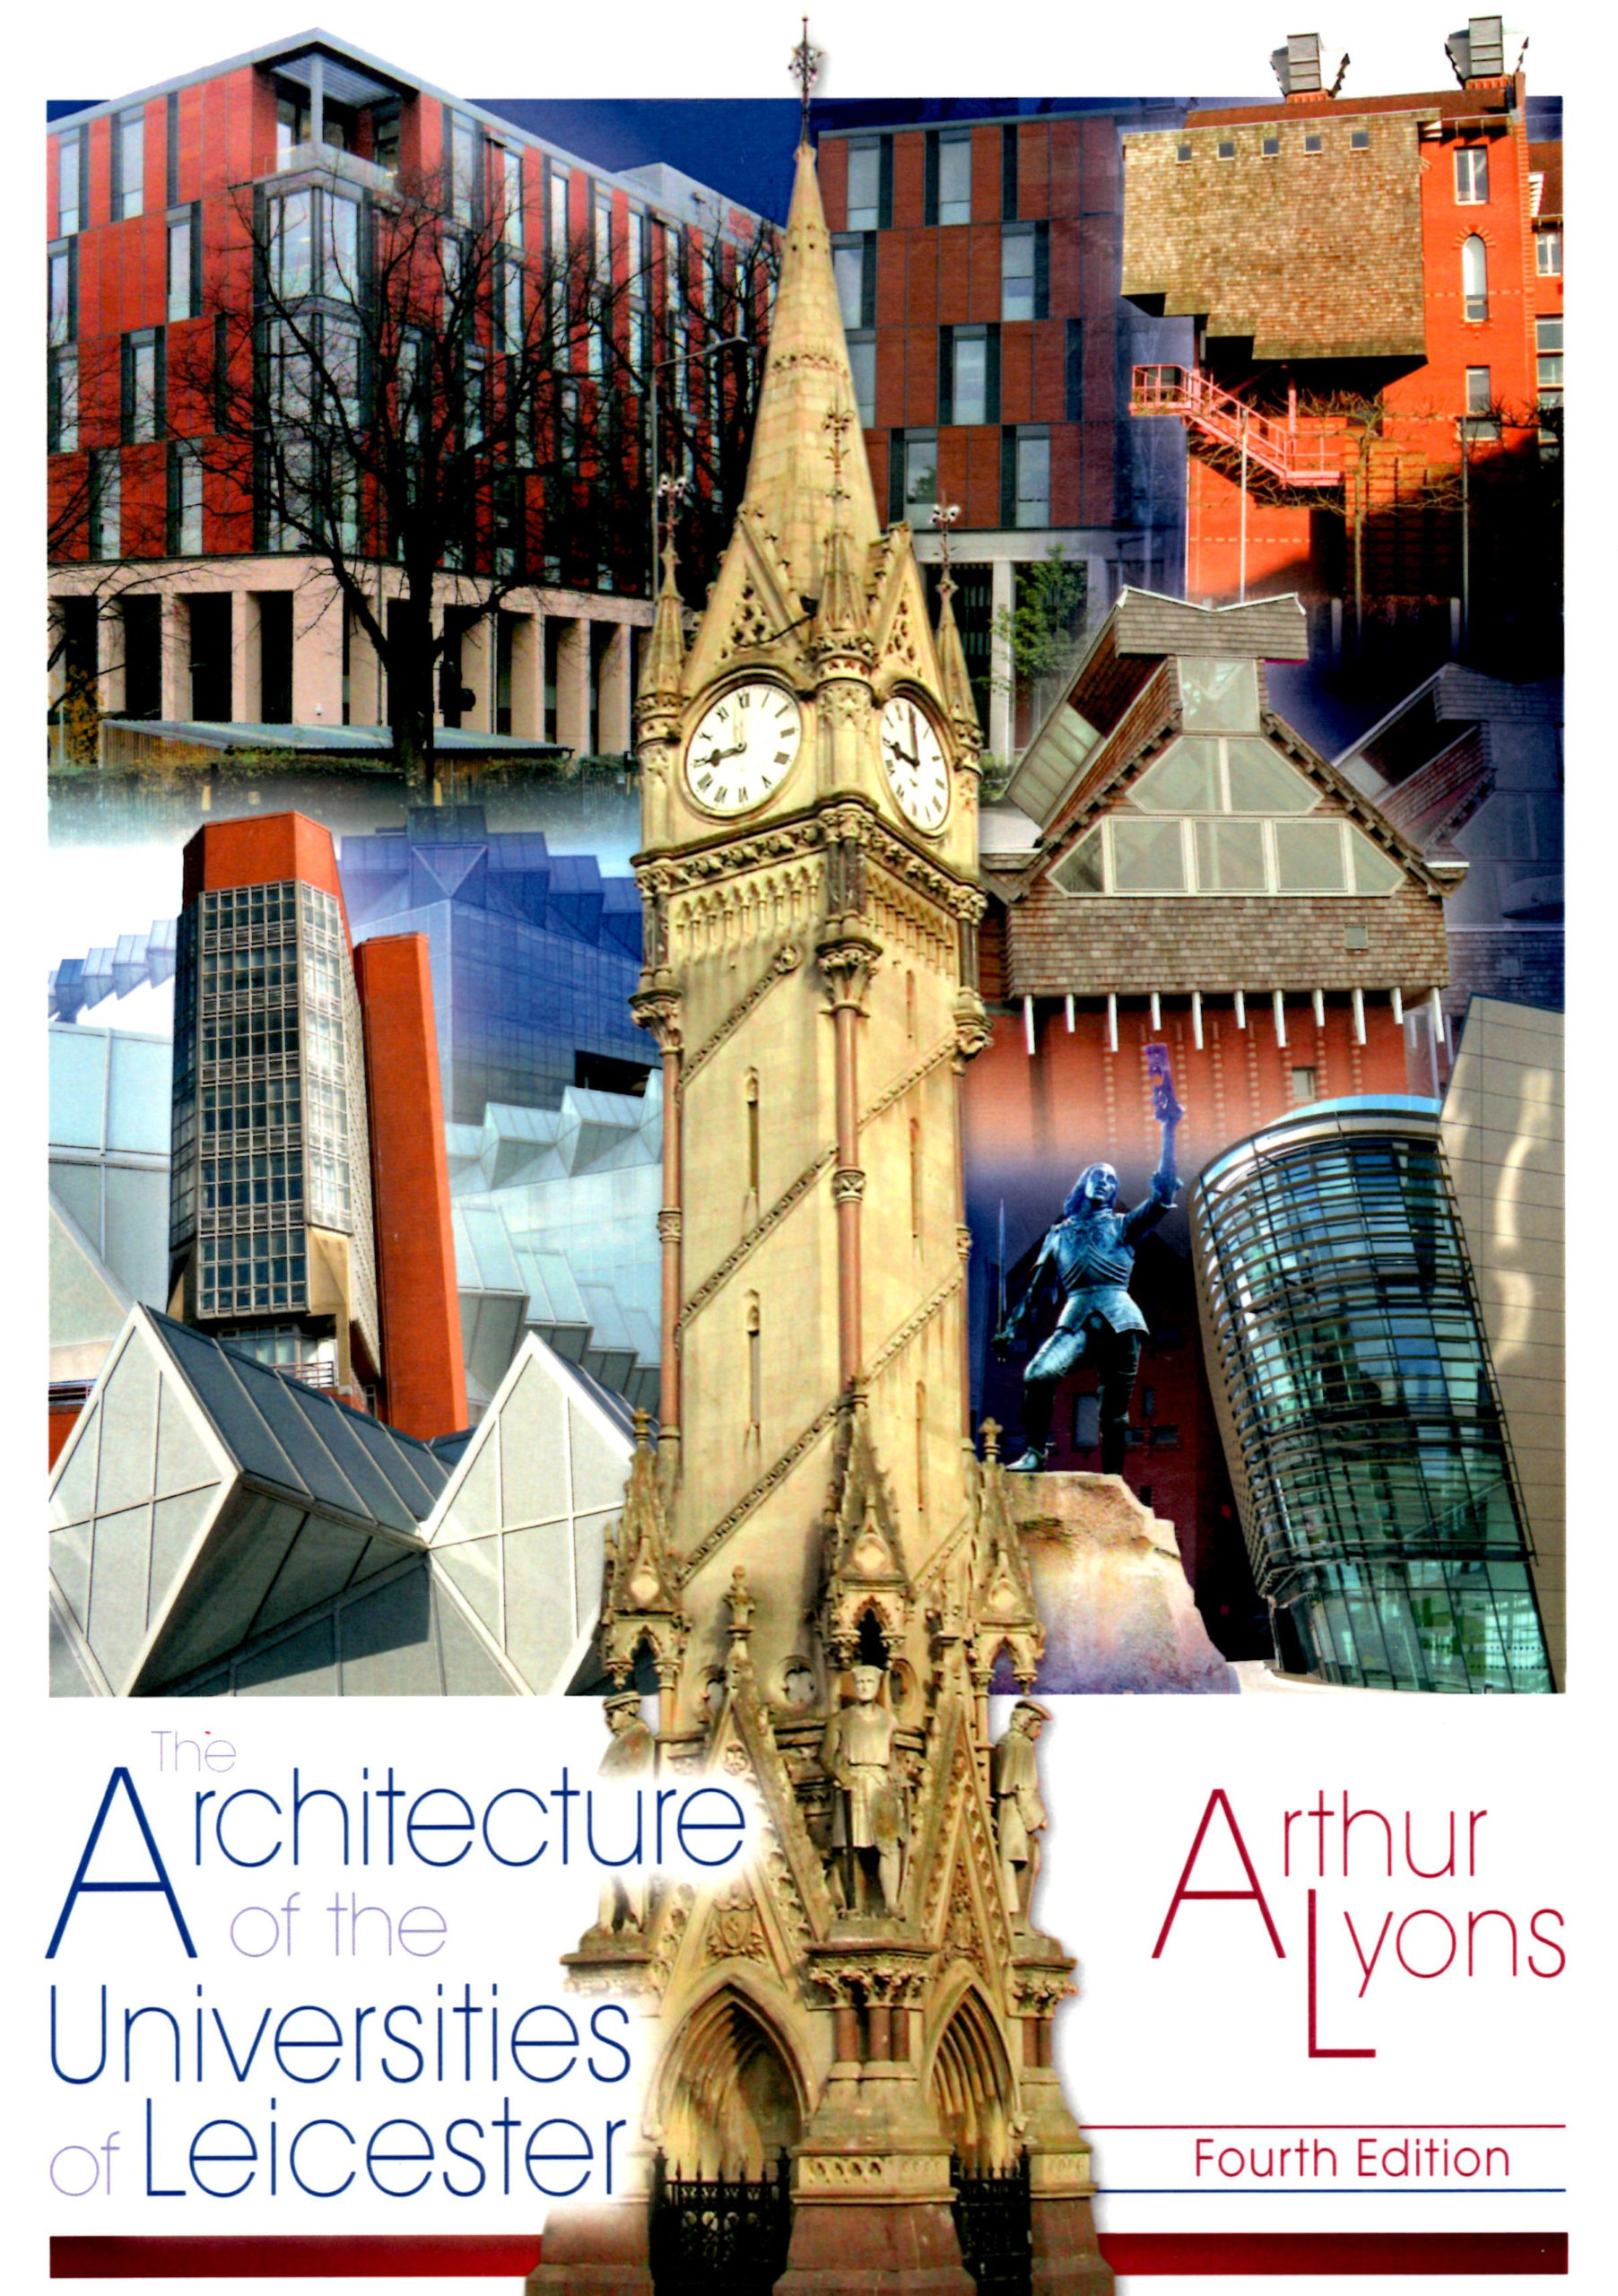 The Architecture of the Universities of Leicester – Fourth Edition